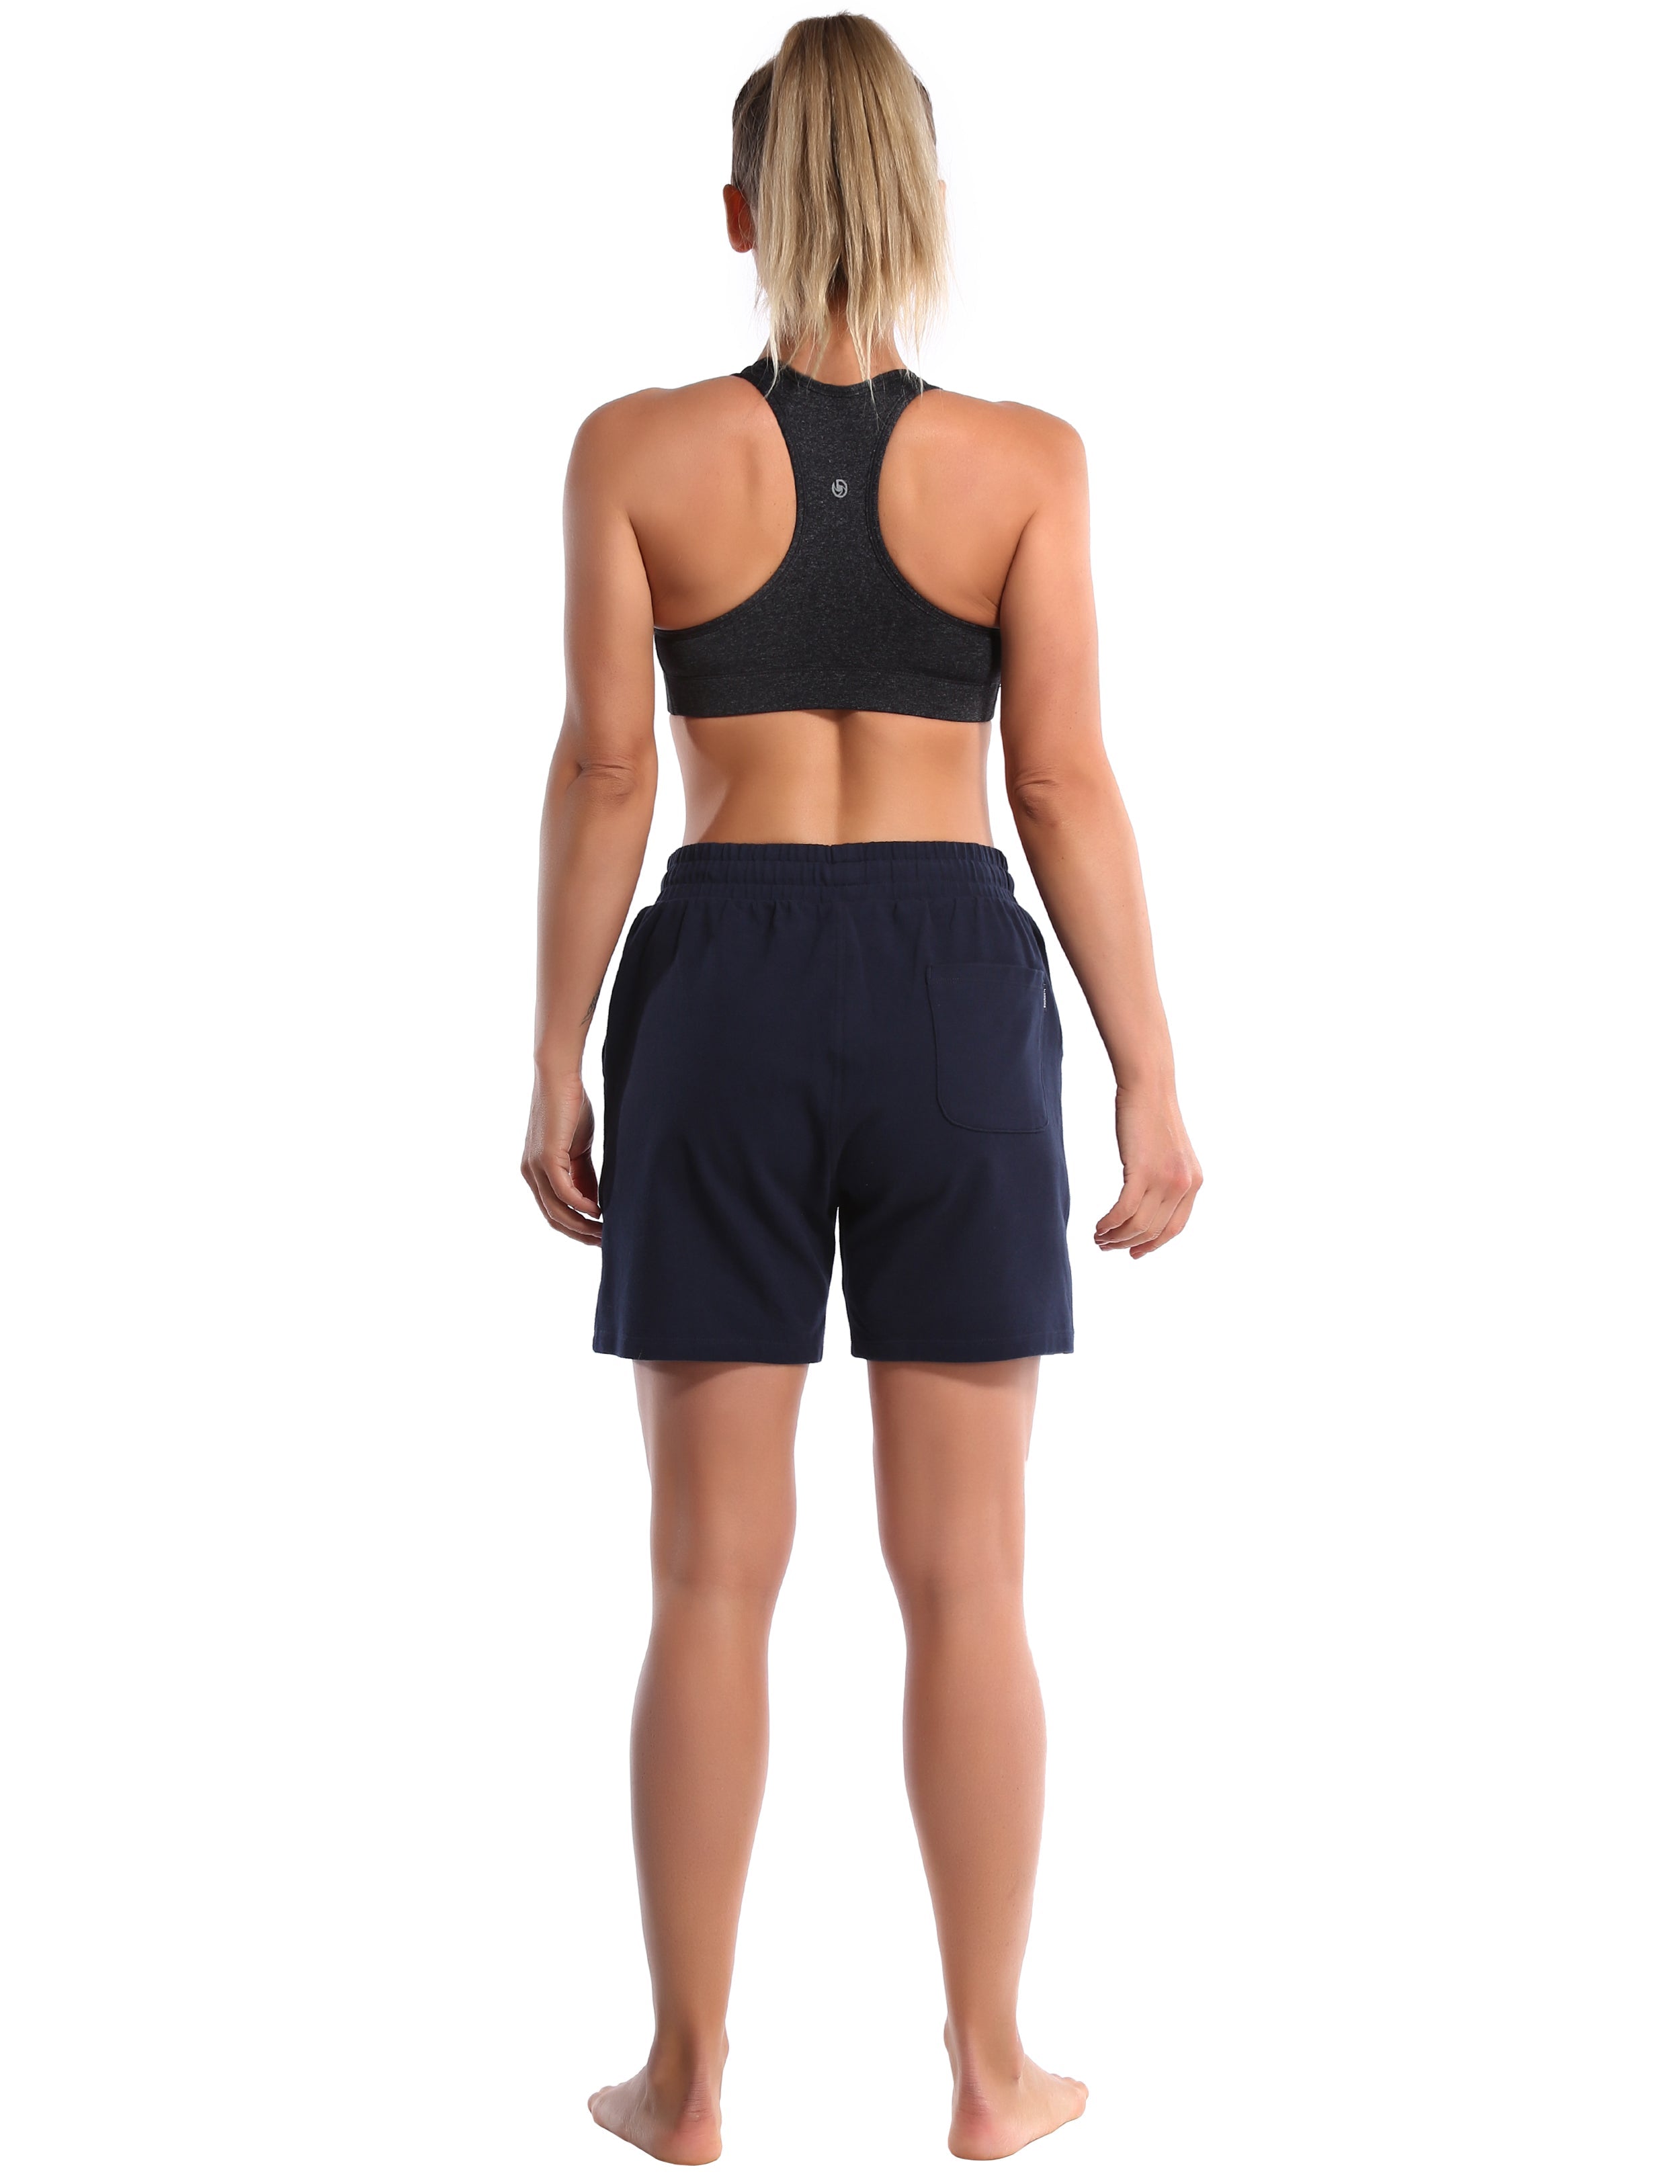 5" Joggers Shorts darknavy 90% Cotton, 10% Spandex Soft and Elastic Drawstring closure Lightweight & breathable fabric wicks away sweat to keep you comfortable Elastic waistband with internal drawcord for a snug, adjustable fit Big side pockets are available for 4.7", 5", 5.5" mobile phone Reflective logo helps you stand out in low light Perfect for any types of outdoor exercises and indoor fitness,like Golf,running,walking,jogging,lounging,workout,gym fitness,casual use,etc